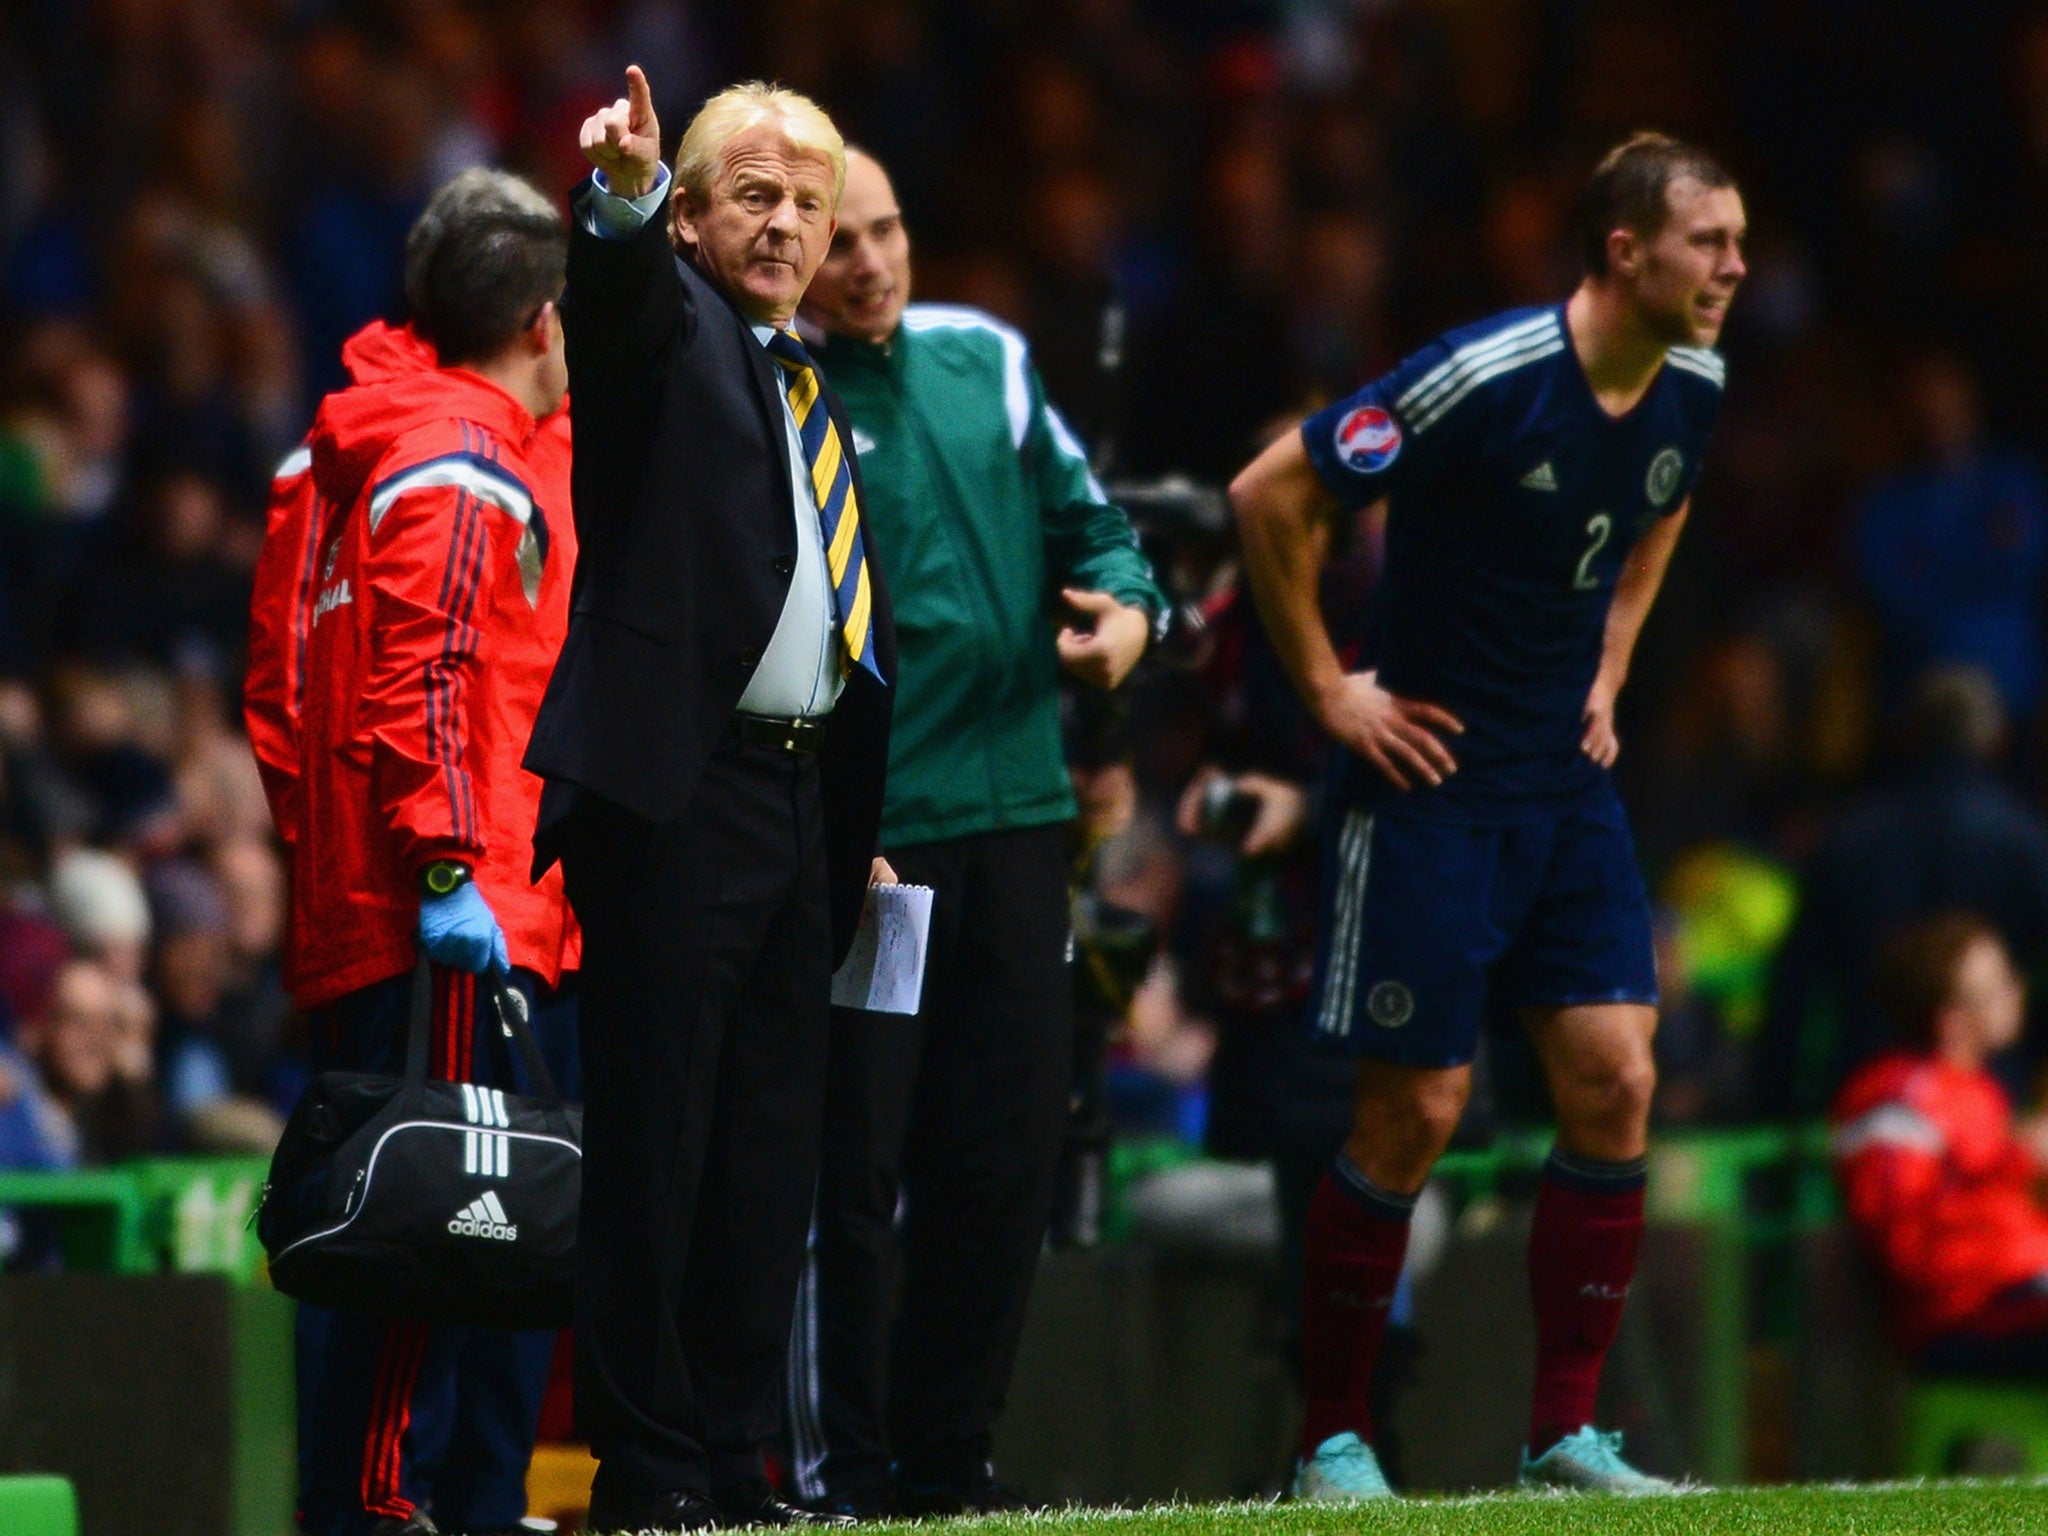 Strachan makes a point from the touchline